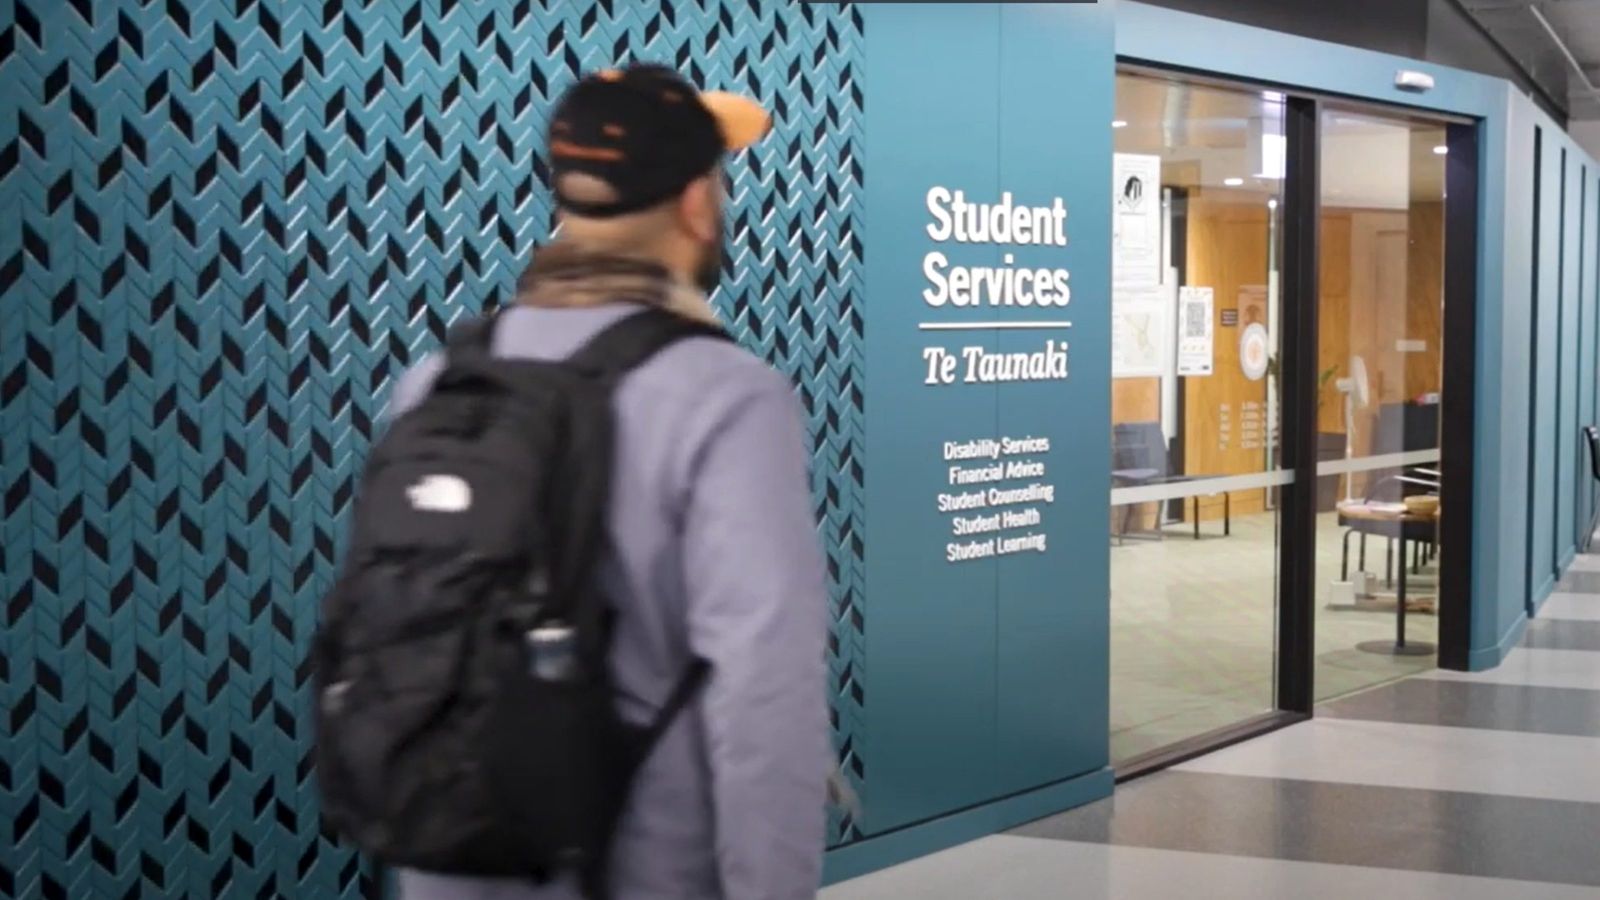 Frame from a video showing a young man wearing a backpack walking towards the Student Services office at the University.